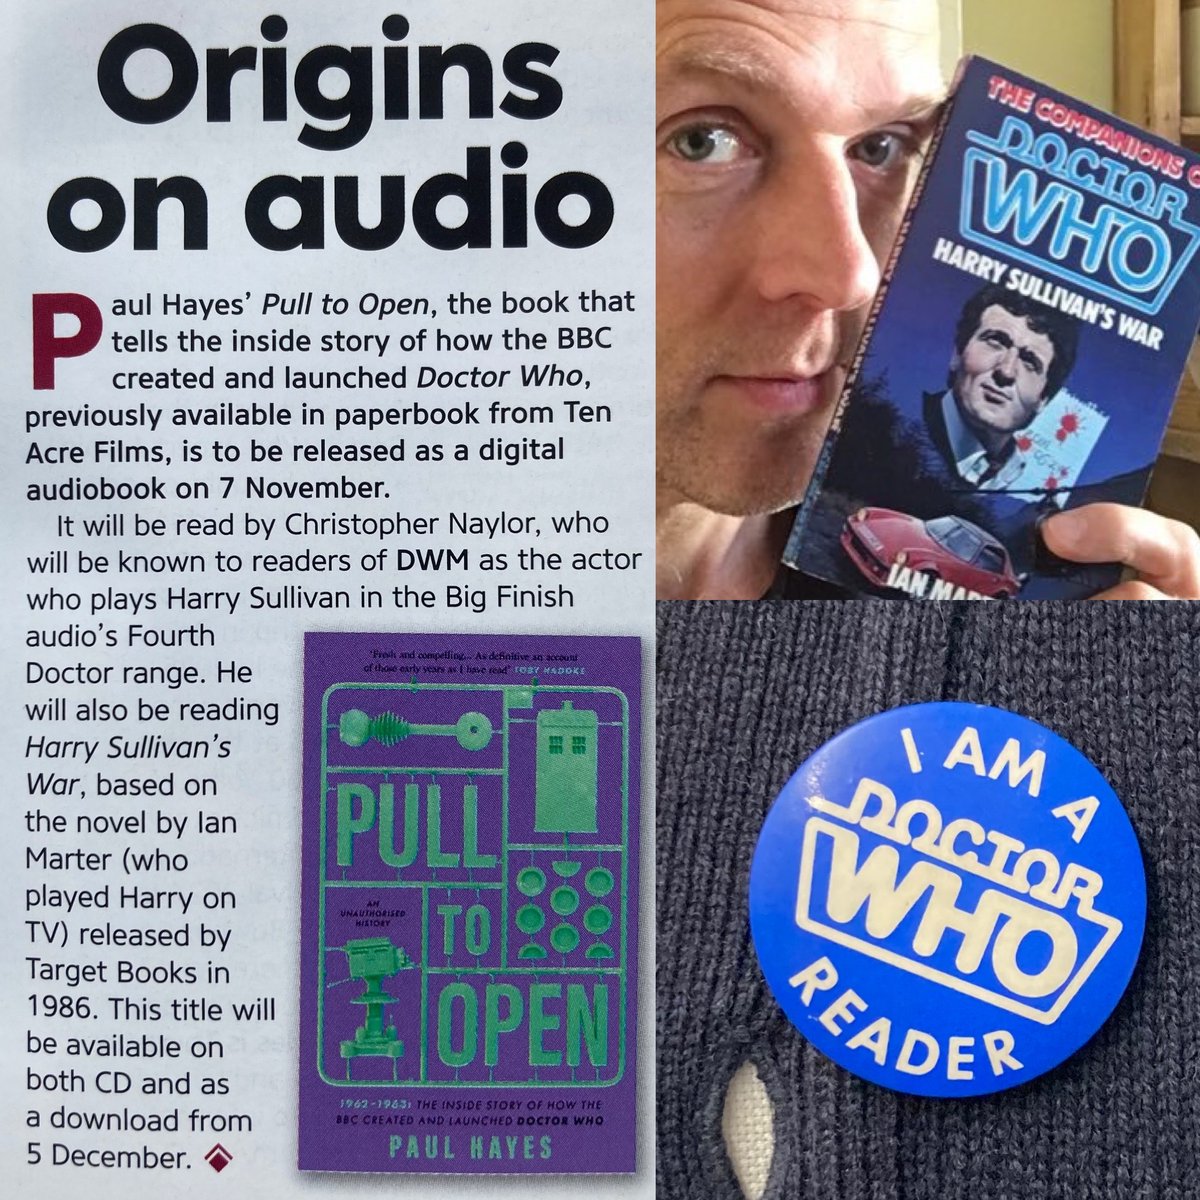 Delighted to be the reader for two wonderful #DoctorWho audiobooks from BBC Audio, coming later this year - ‘Pull To Open’ by @the_questmaster and ‘Harry Sullivan’s War’ by the much-missed Ian Marter. Cliffhangers galore in both!